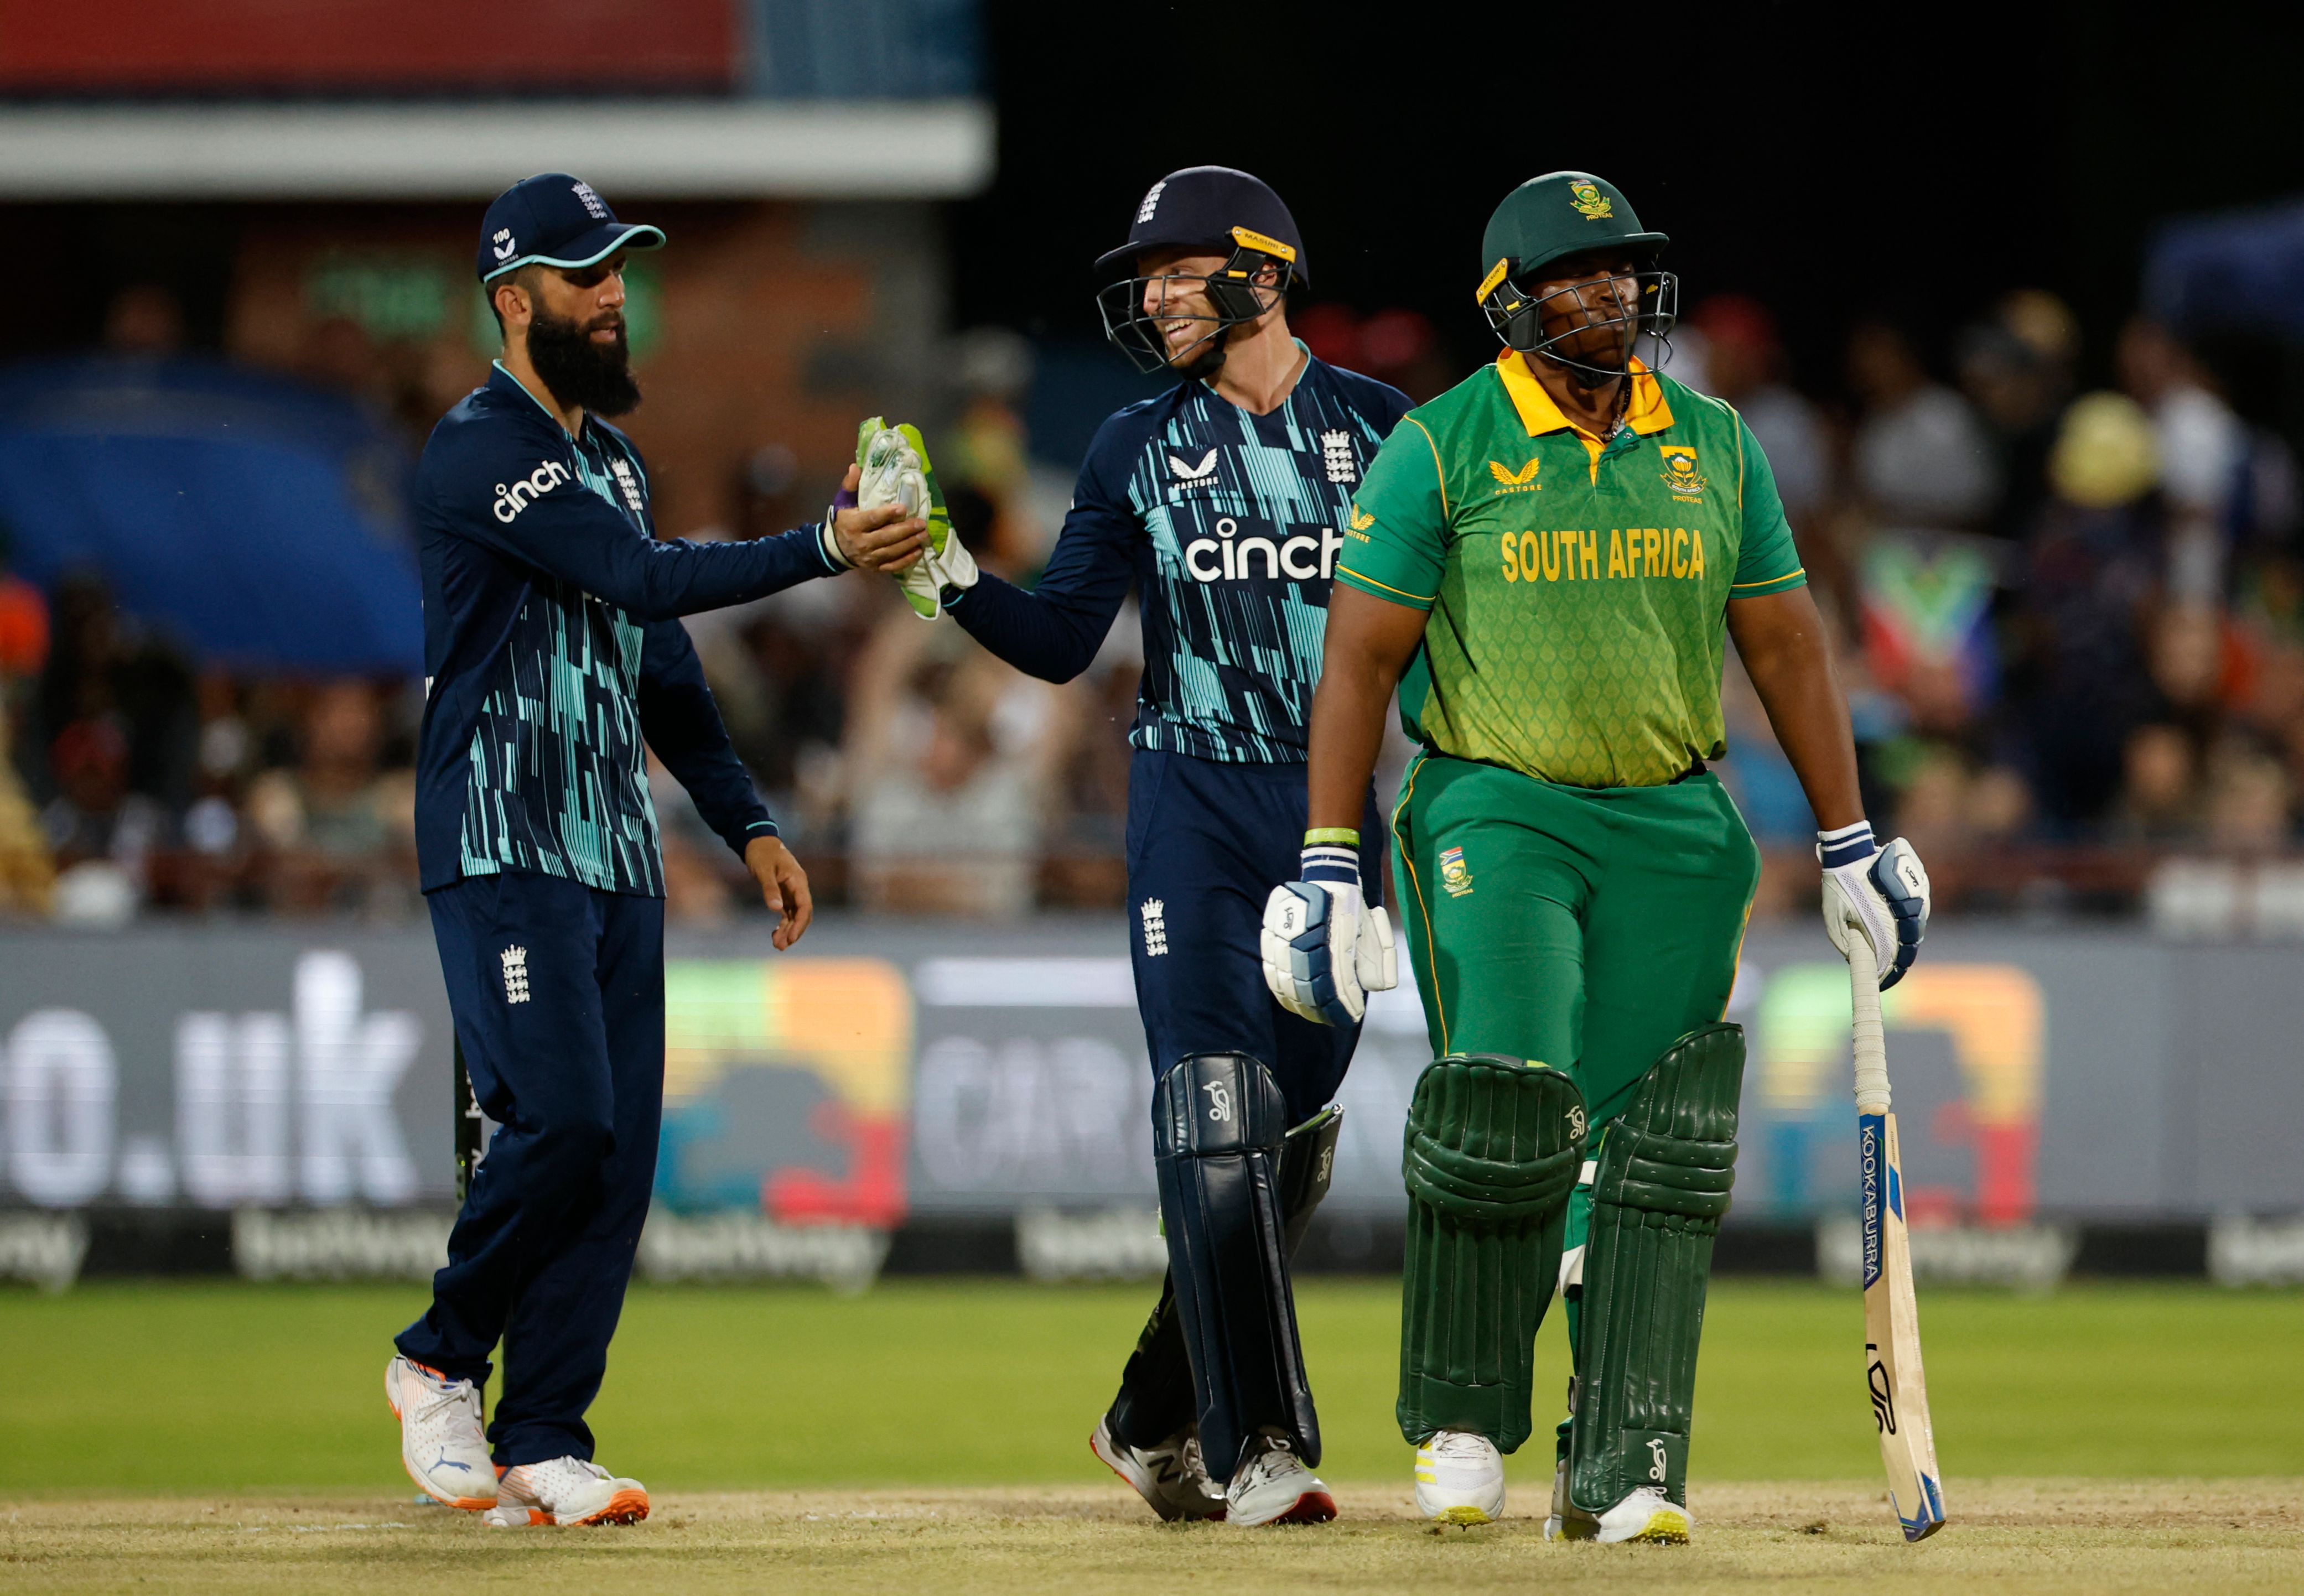 South Africa v England LIVE, third ODI, The Oval, Kimberley score and updates - Live